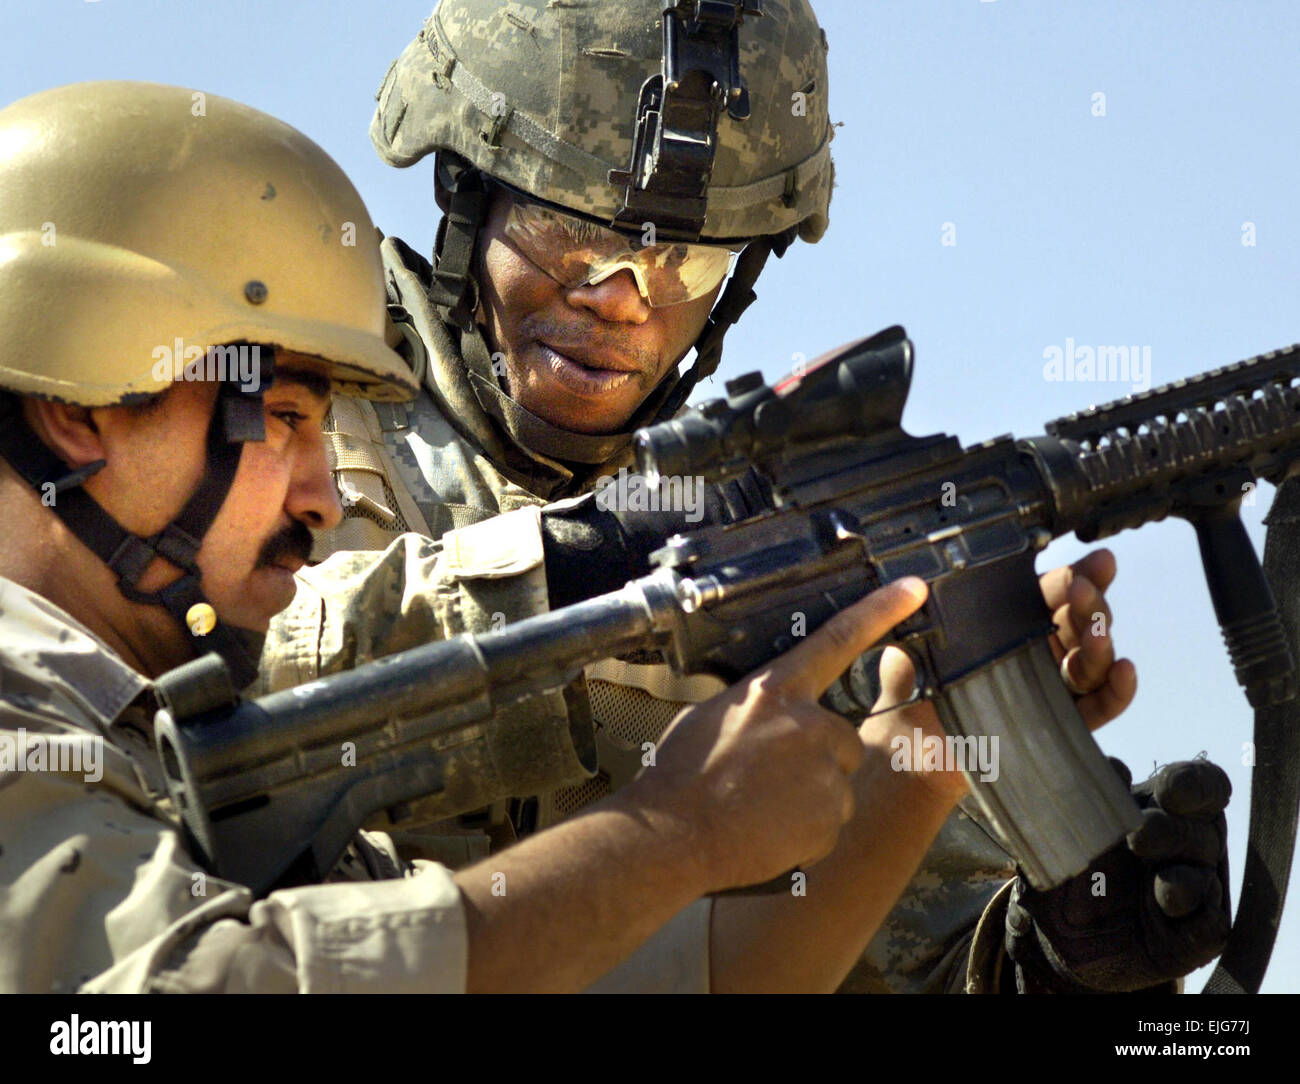 Staff Sgt. Jesse Linen, 1st Brigade Combat Team, 1st Armored Division, shows a member of the Iraqi Army the functions of the M-4 assault rifle during joint weapons training in Tal Afar, Iraq on May 18, 2006.  The purpose of the training was two-fold, allowing both U.S. and Iraqi forces to familiarize each other on various weapons systems, and developing espirit de corps amongst both armies.  Staff Sgt. Jacob N. Bailey.      . Stock Photo